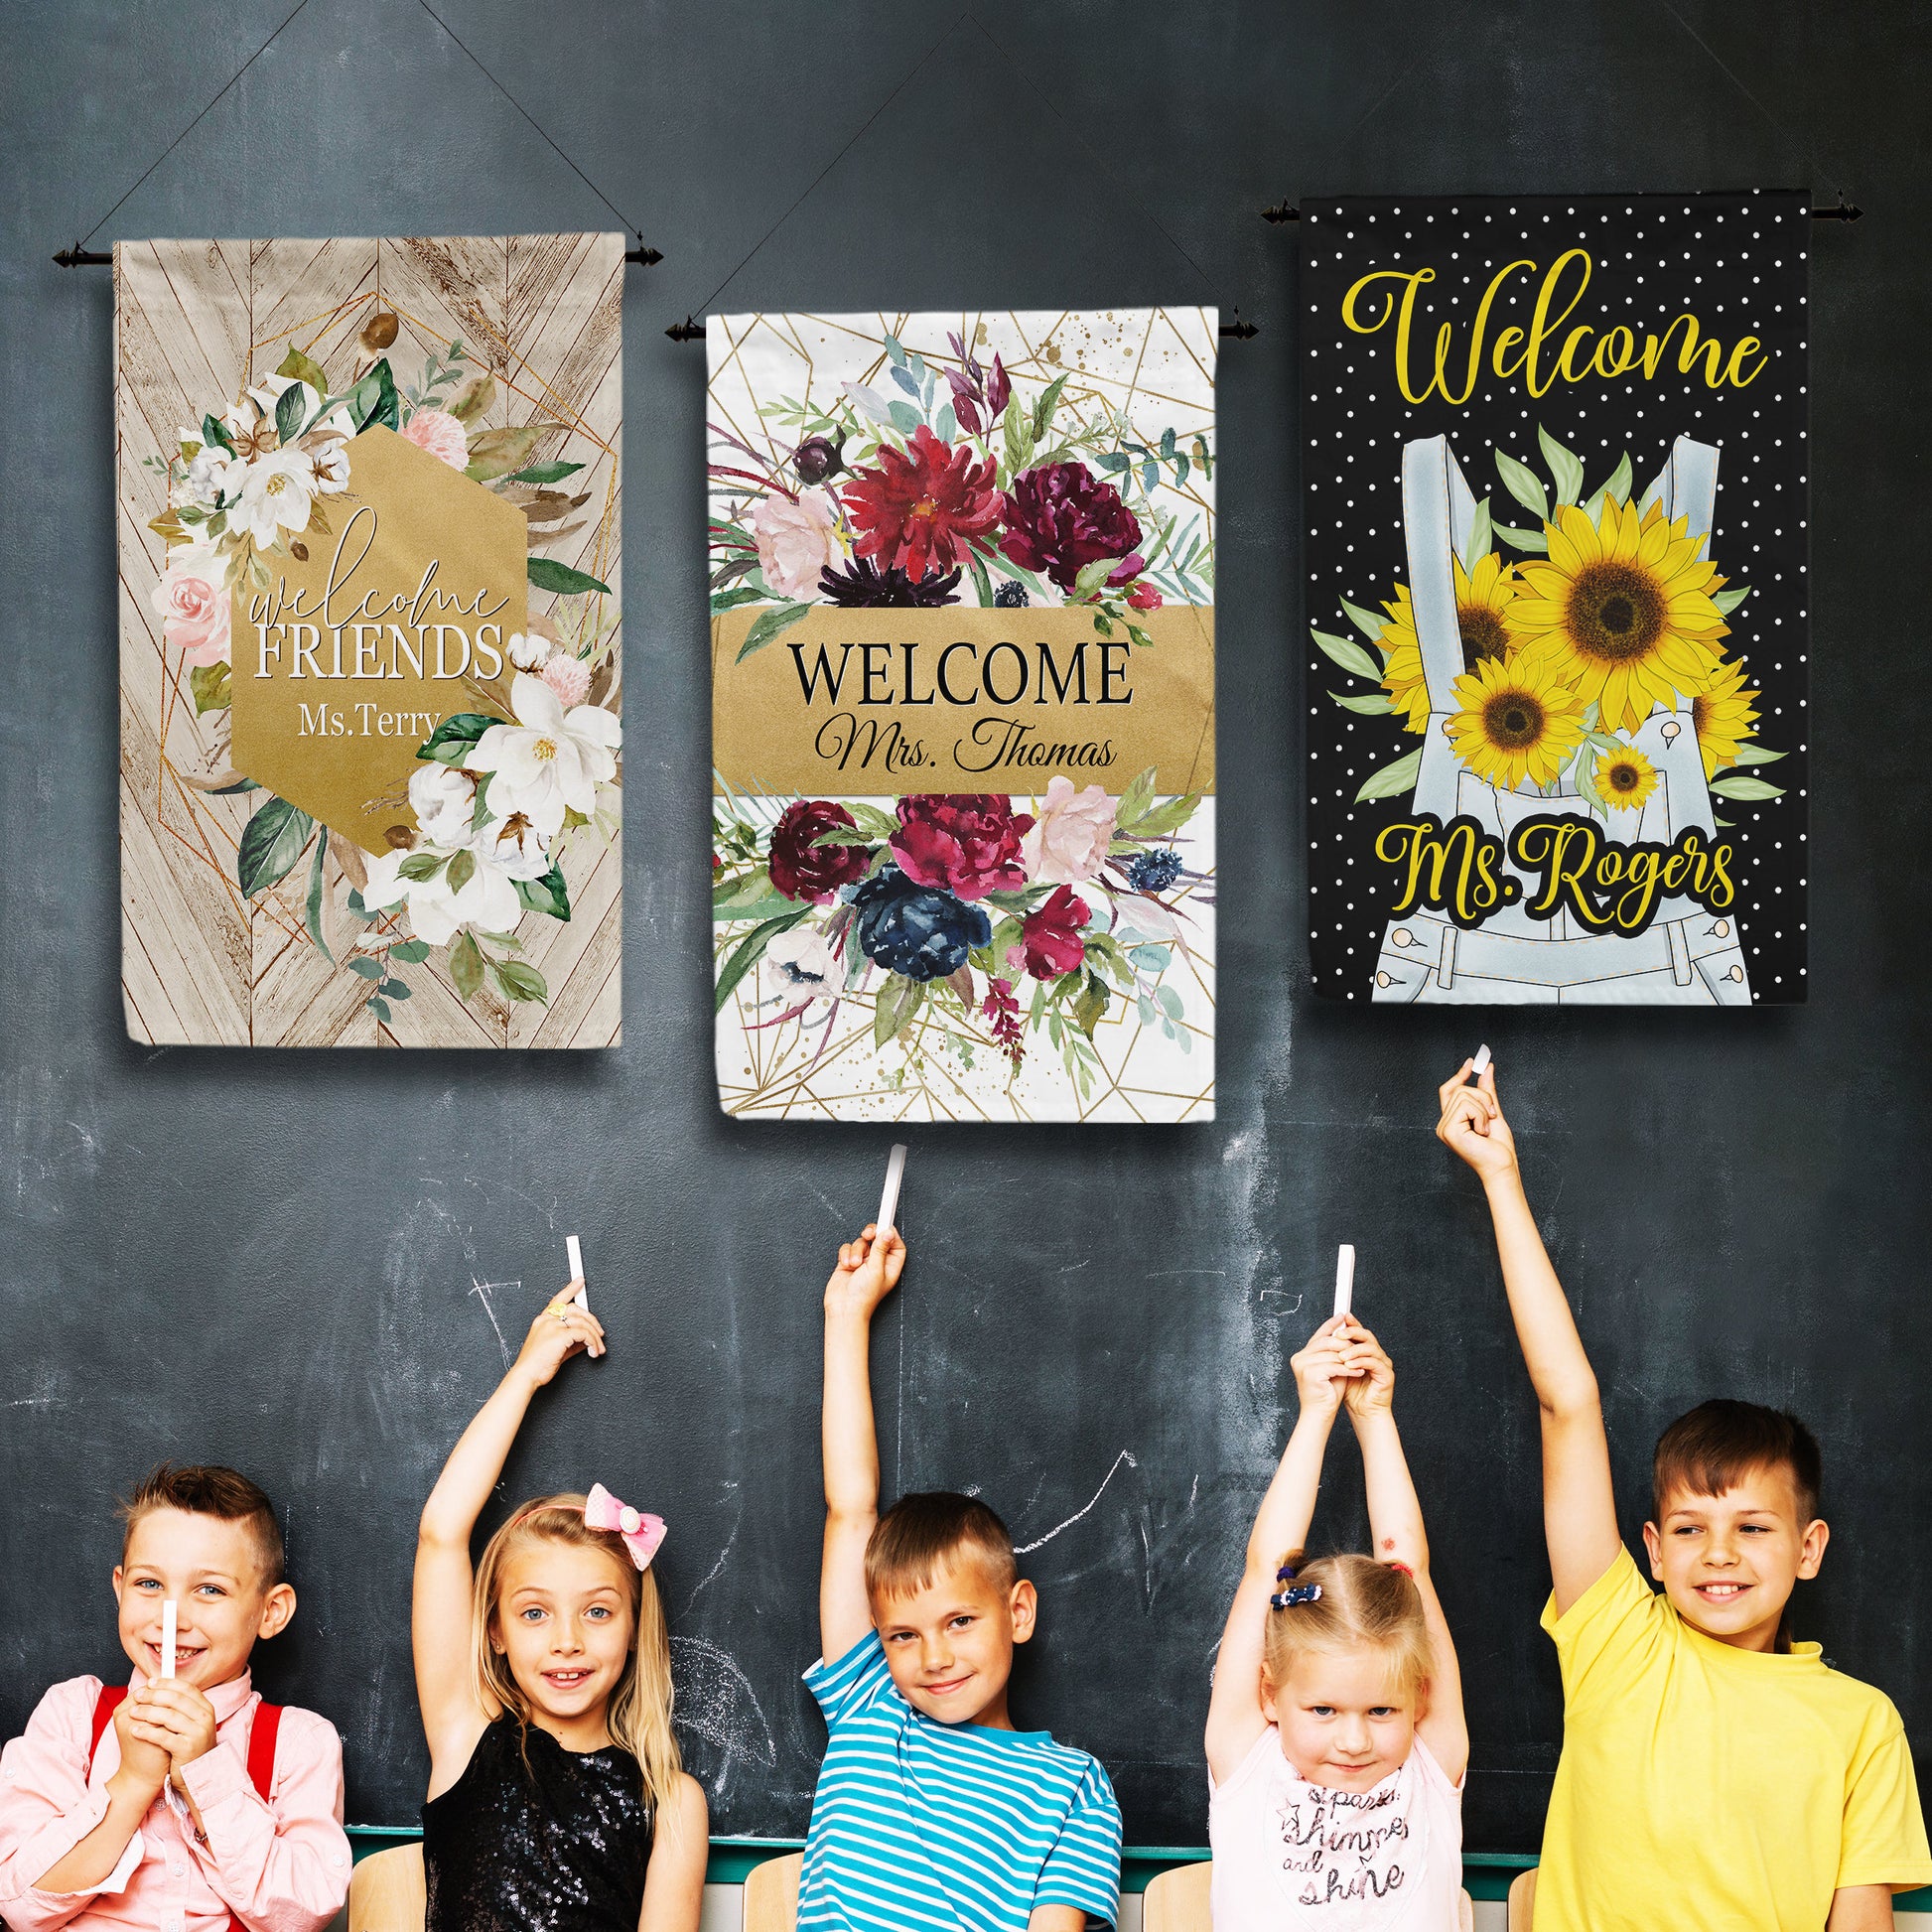 Personalized Teacher Classroom Flags